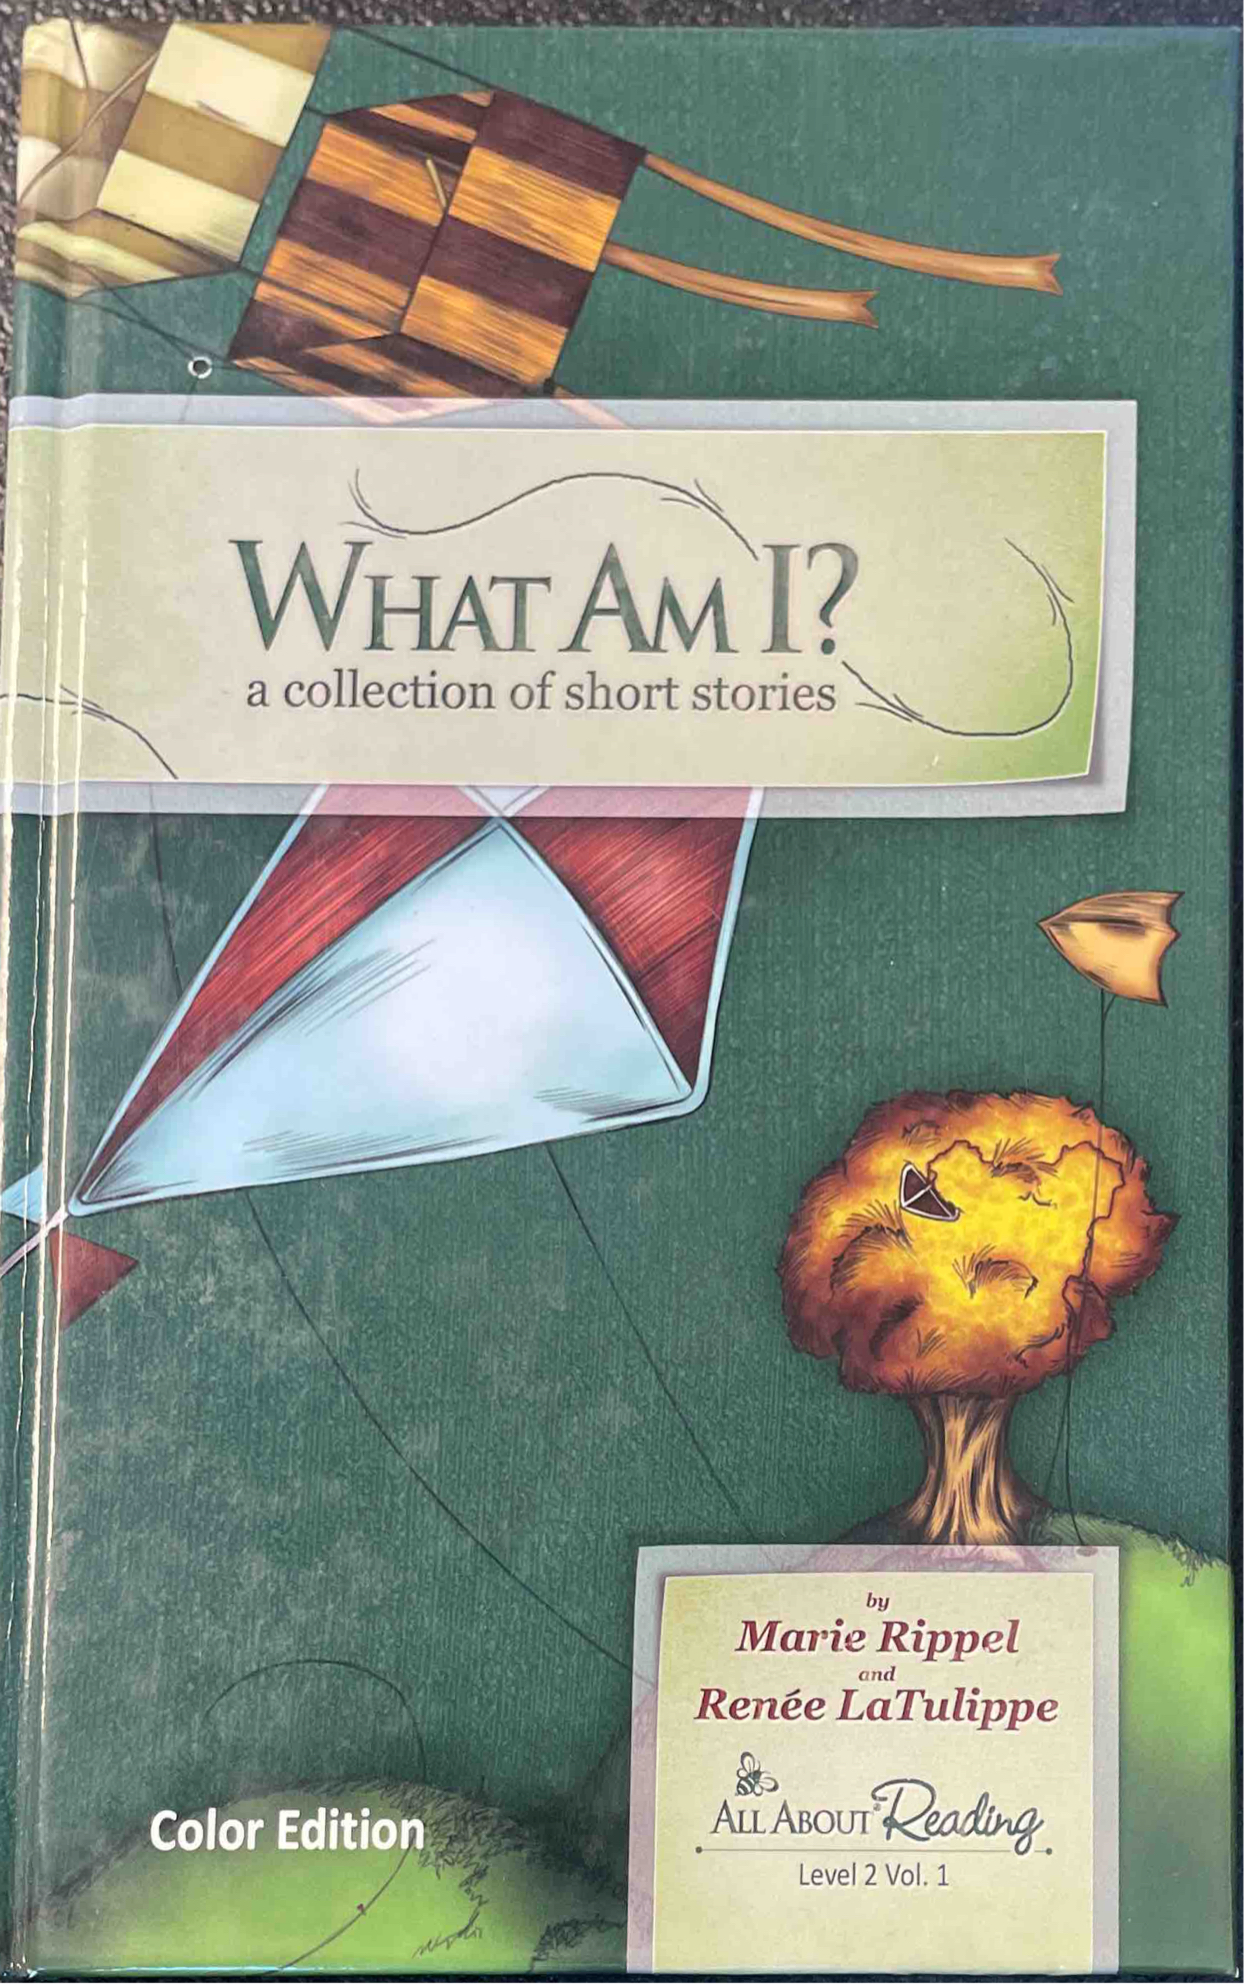 All About Reading - What Am I? : Level 2, Volume 1- Color Edition